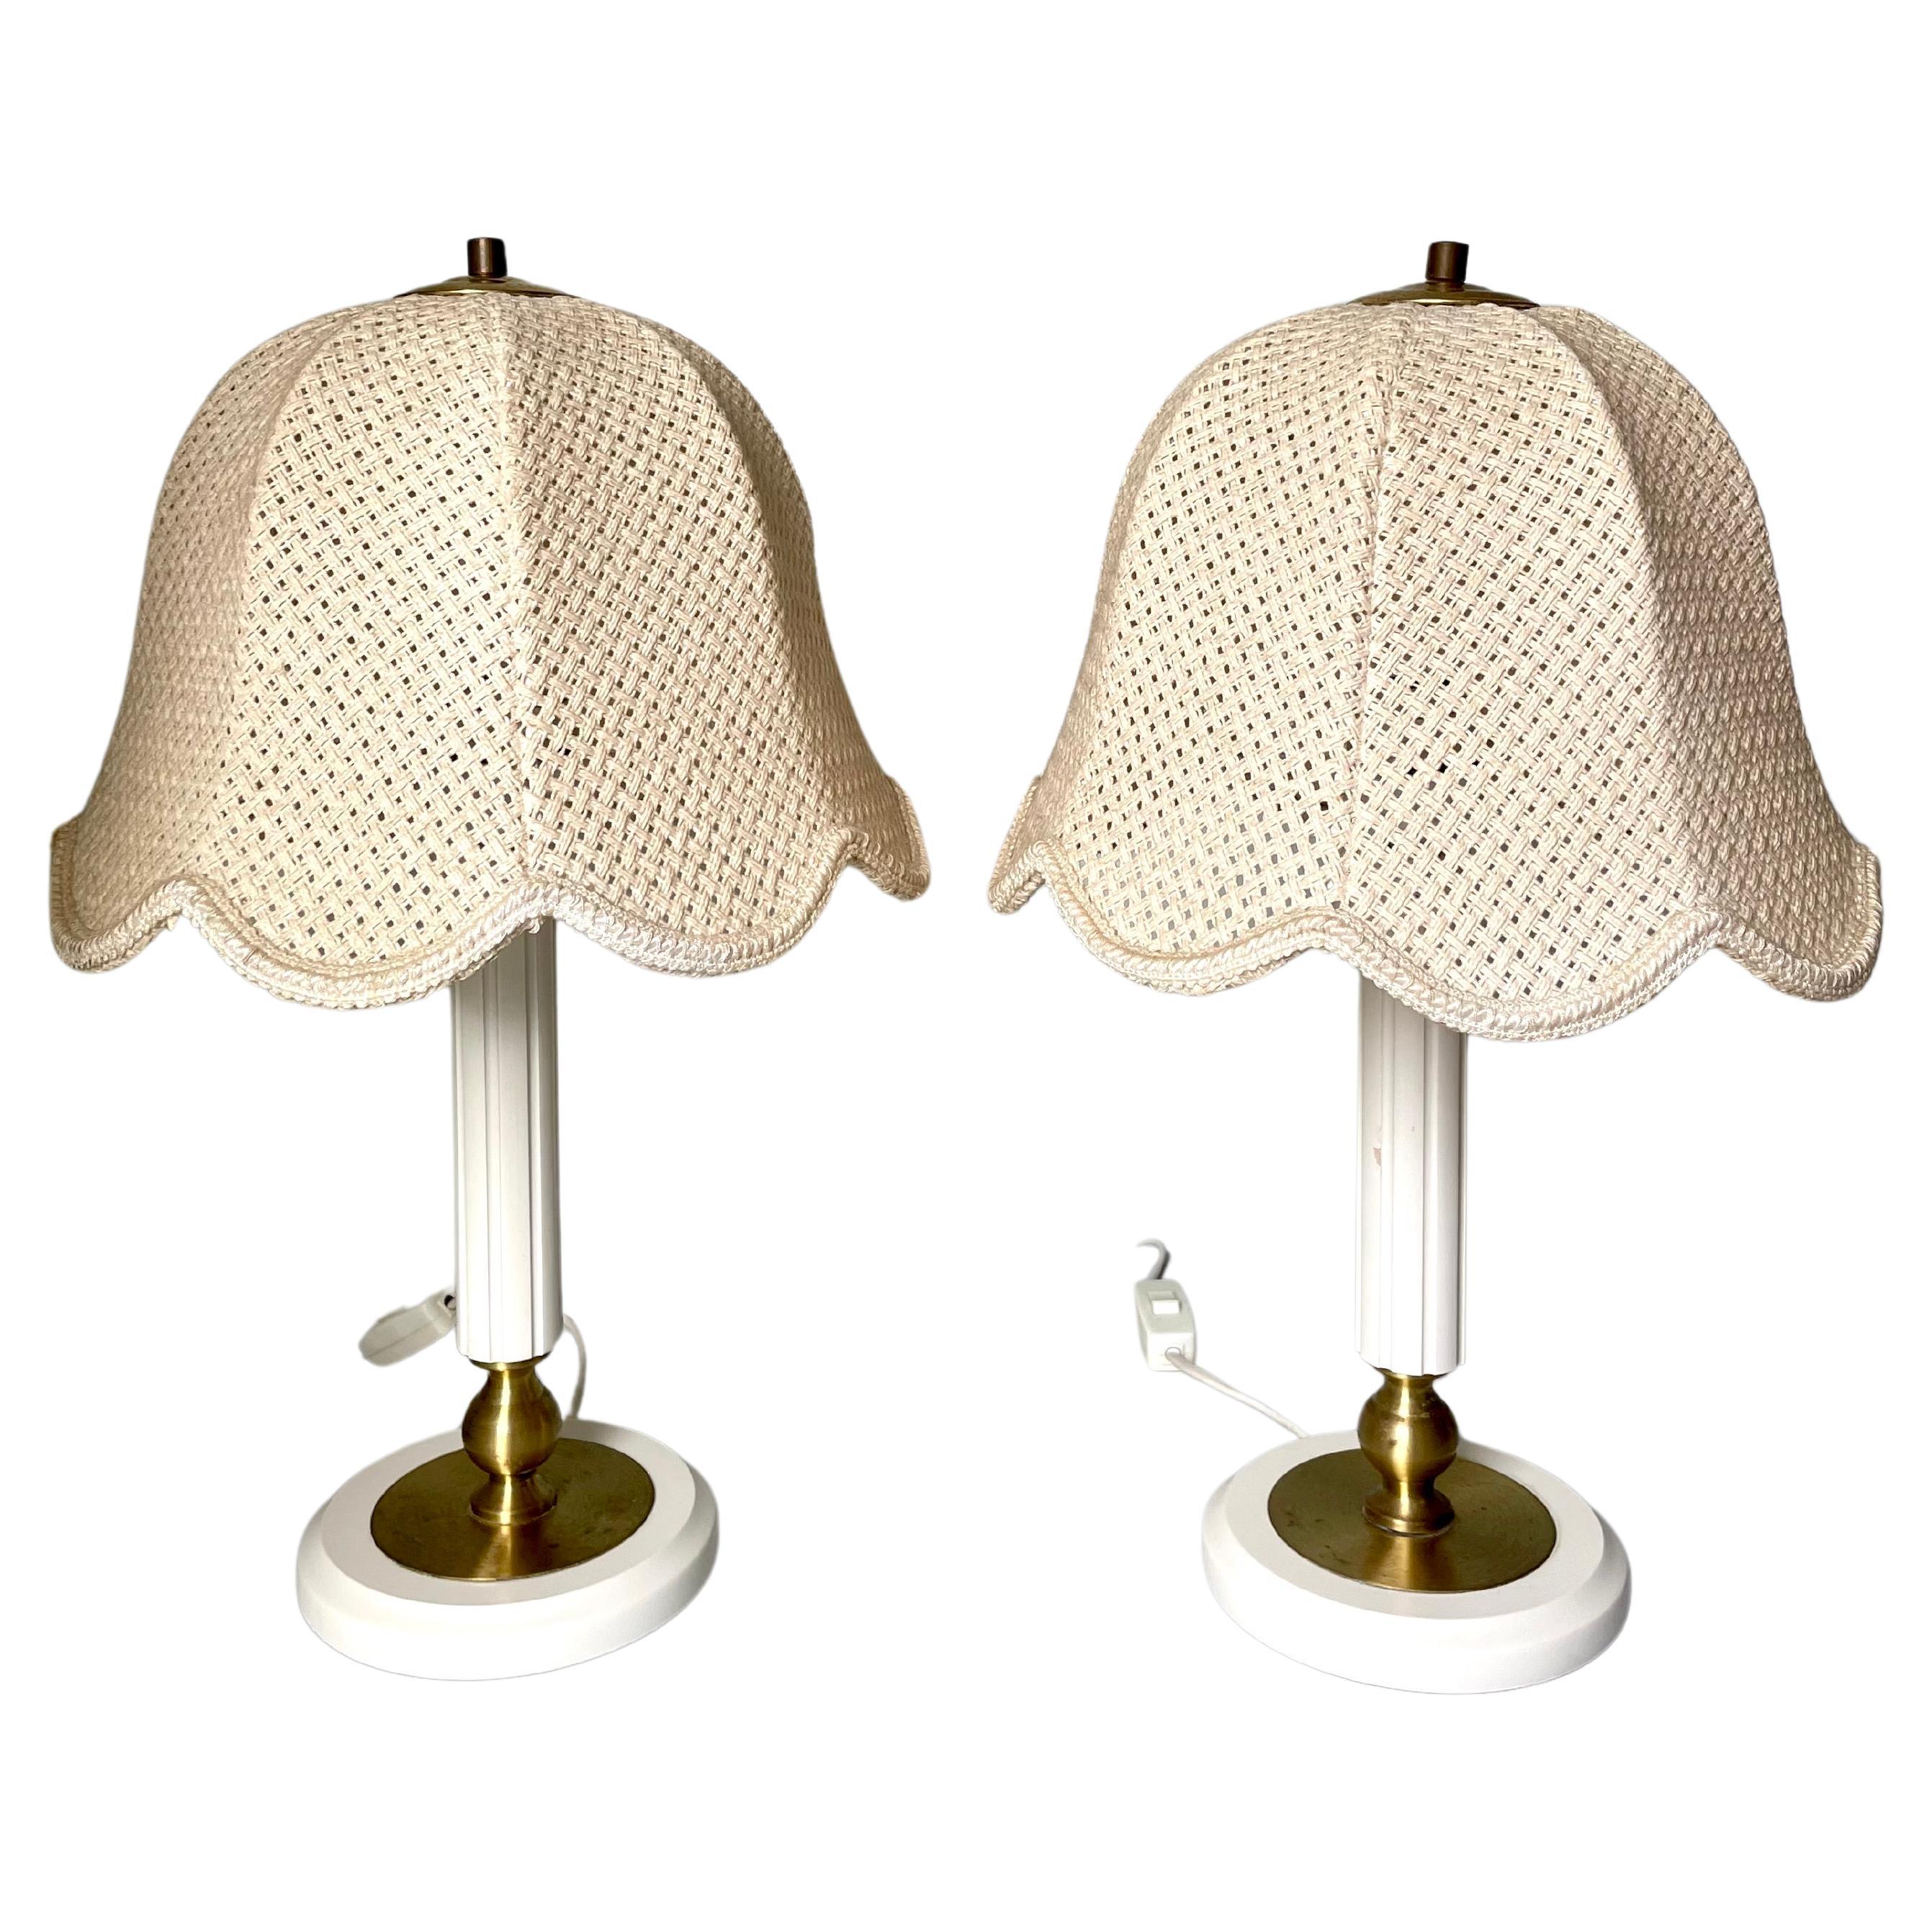 Pair of white, beige, cream Scandinavian Modern wooden table lamps manufactured by Markslöjd in the 1980s. Original braided tulip shaped cream colored textile shades with brass top. Slender lined cream white lacquered wooden neck and base with brass